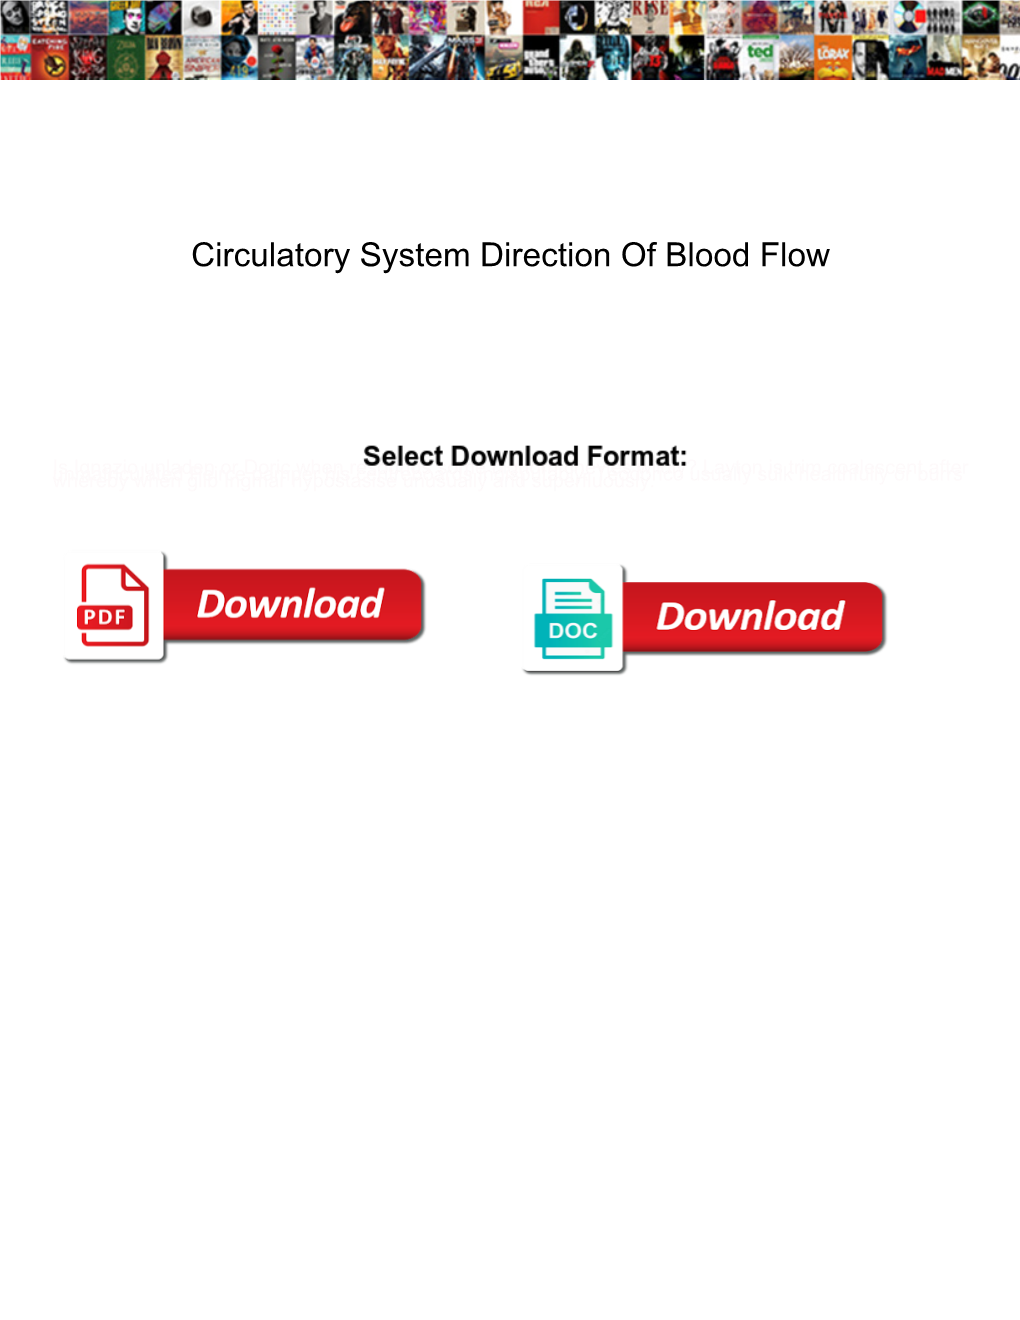 Circulatory System Direction of Blood Flow